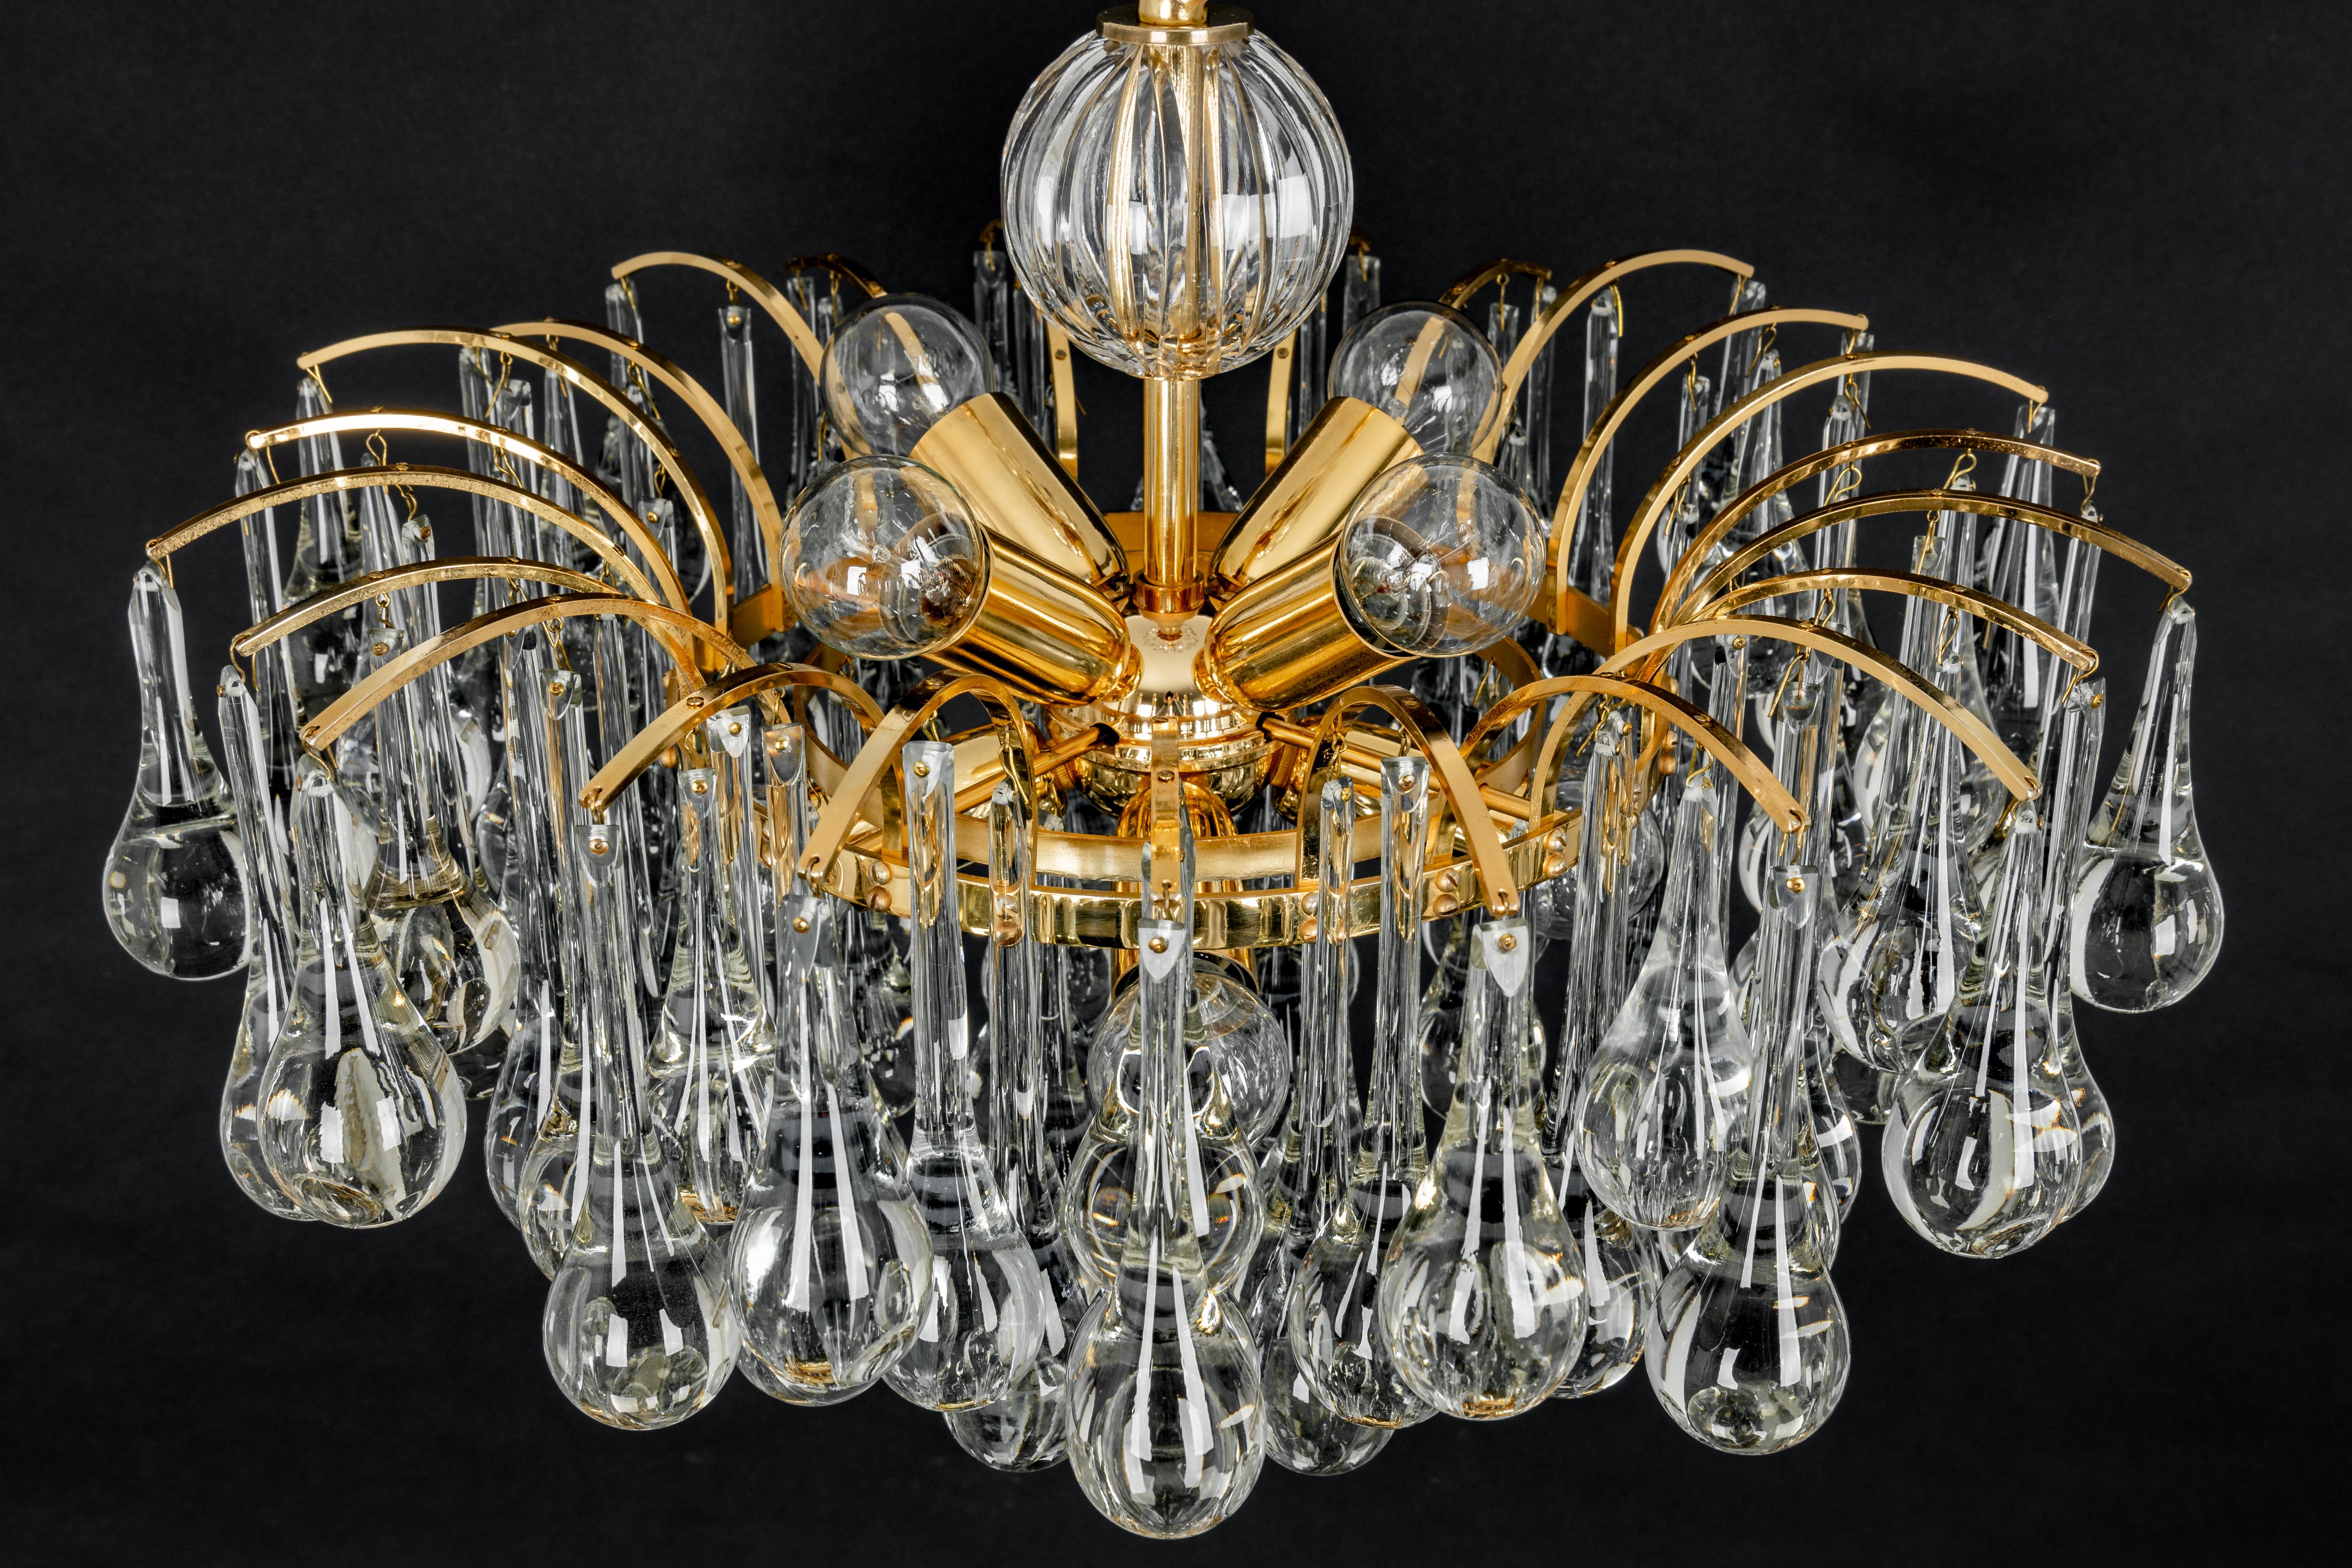 1 of 2 Large Murano Glass Tear Drop Chandelier, Christoph Palme, Germany, 1970s For Sale 9